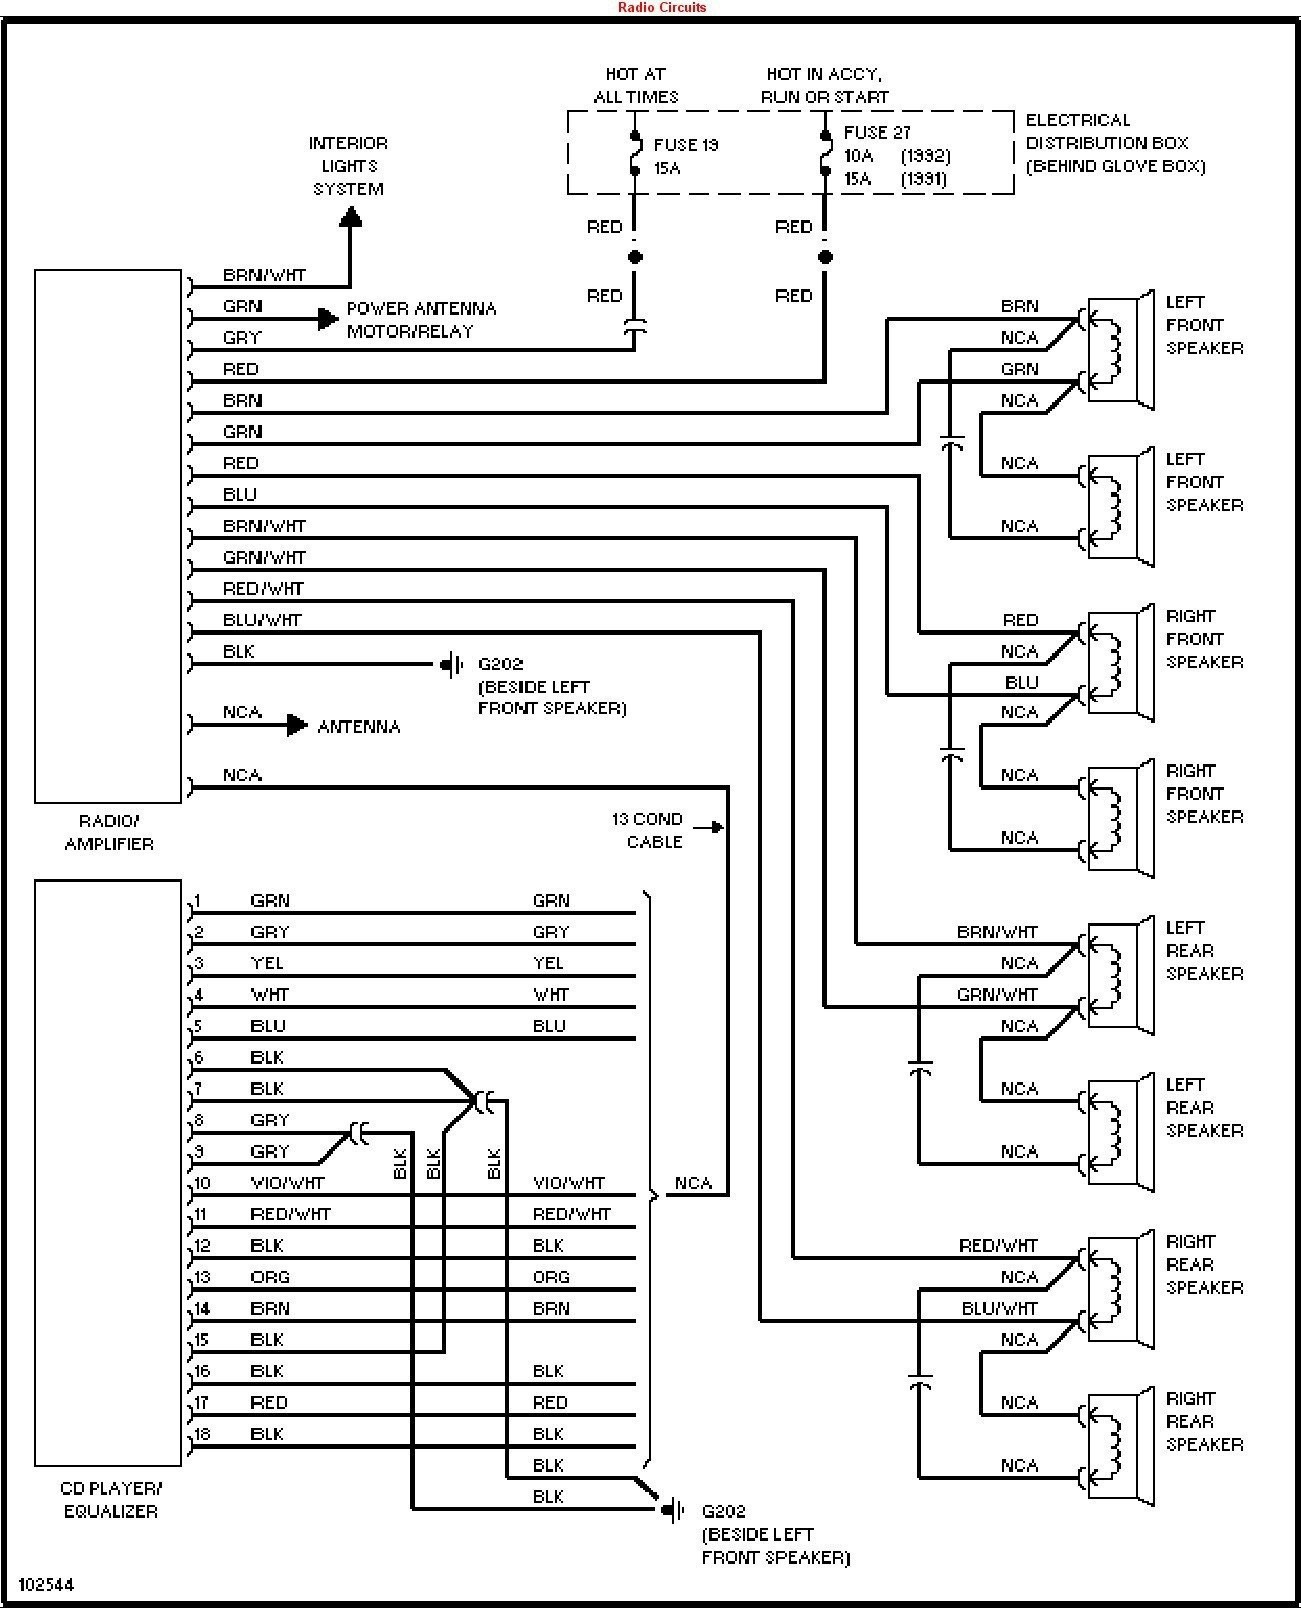 Wiring Diagram for Pioneer Car Stereo New Pioneer Avh 280bt Wiring Diagram Best Pioneer Car Stereo